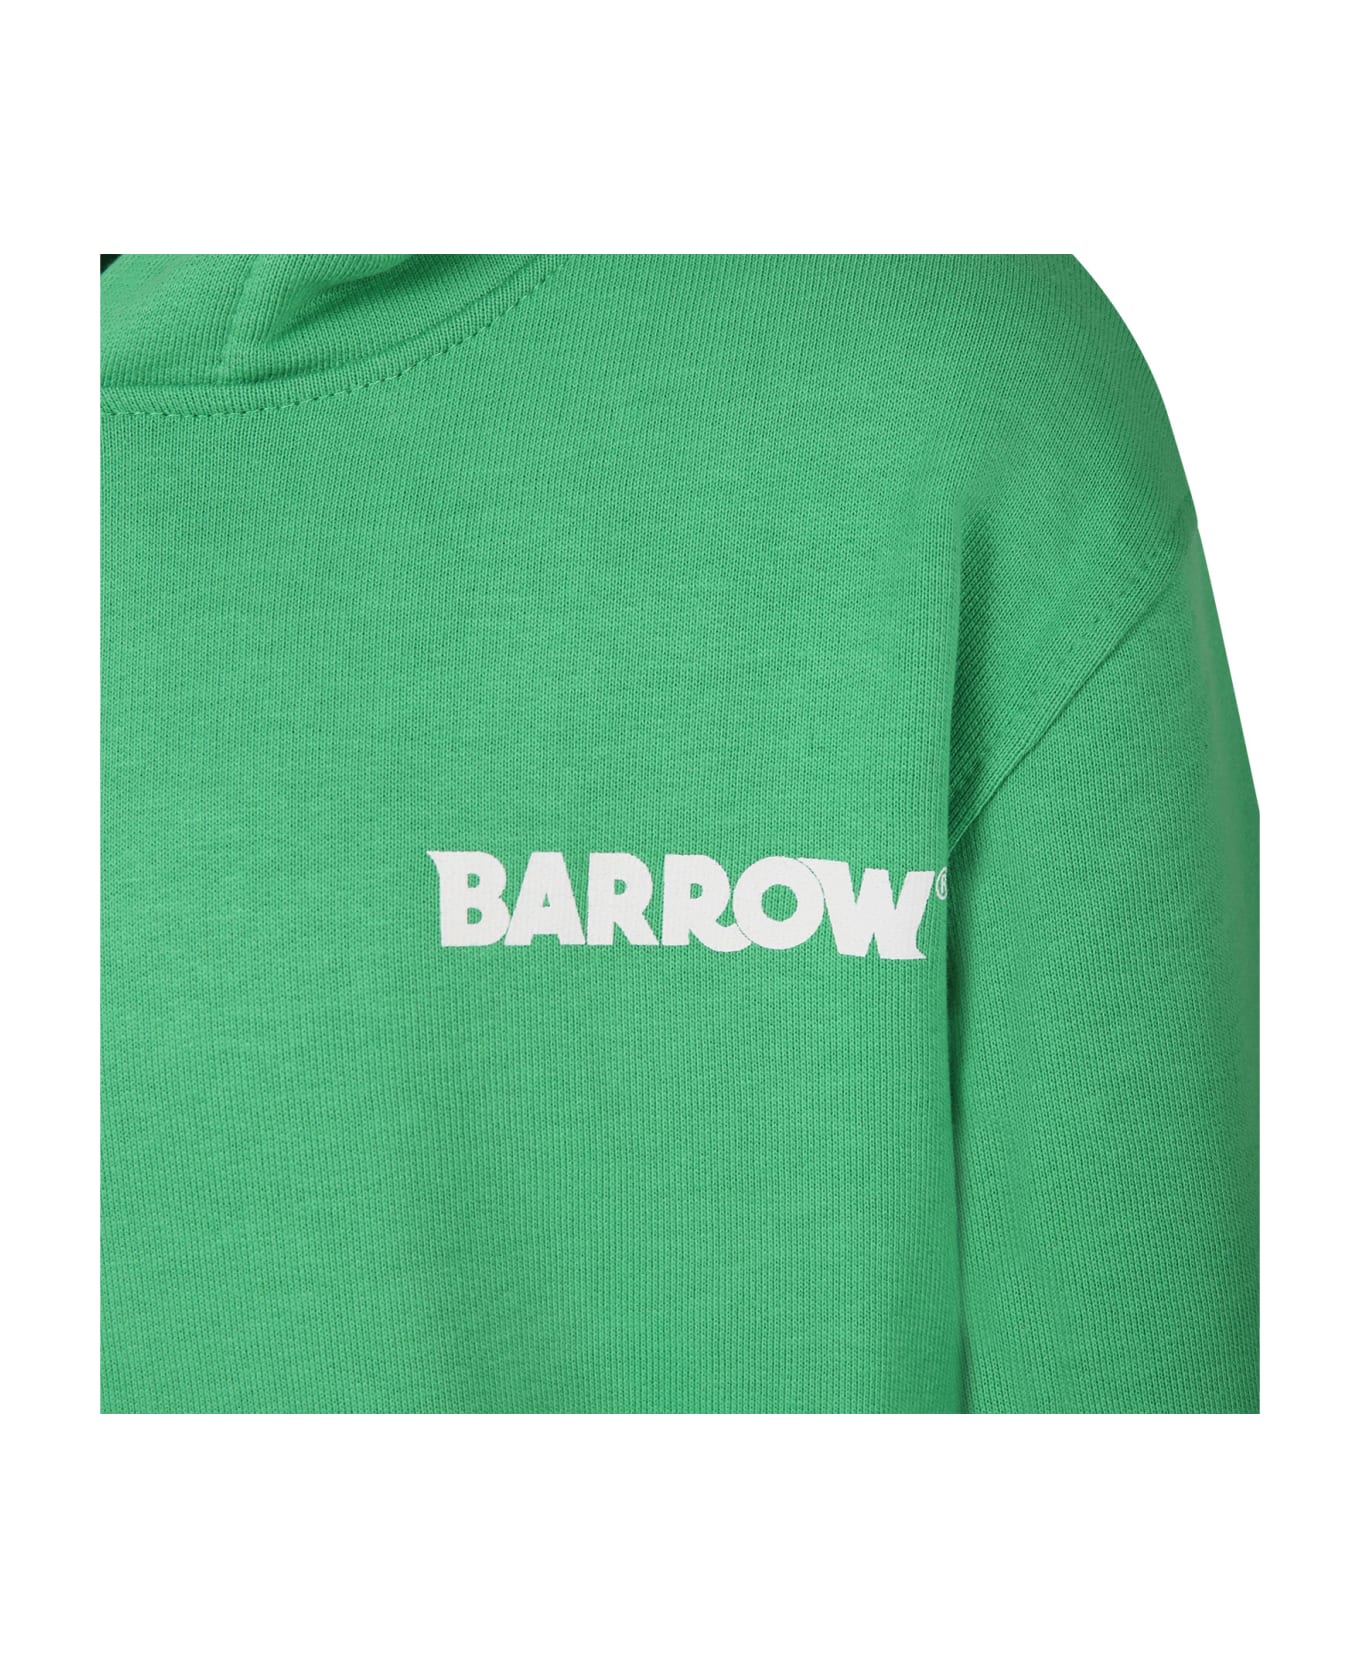 Barrow Green Sweatshirt For Kids With Logo And Iconic Smiley Face - Green